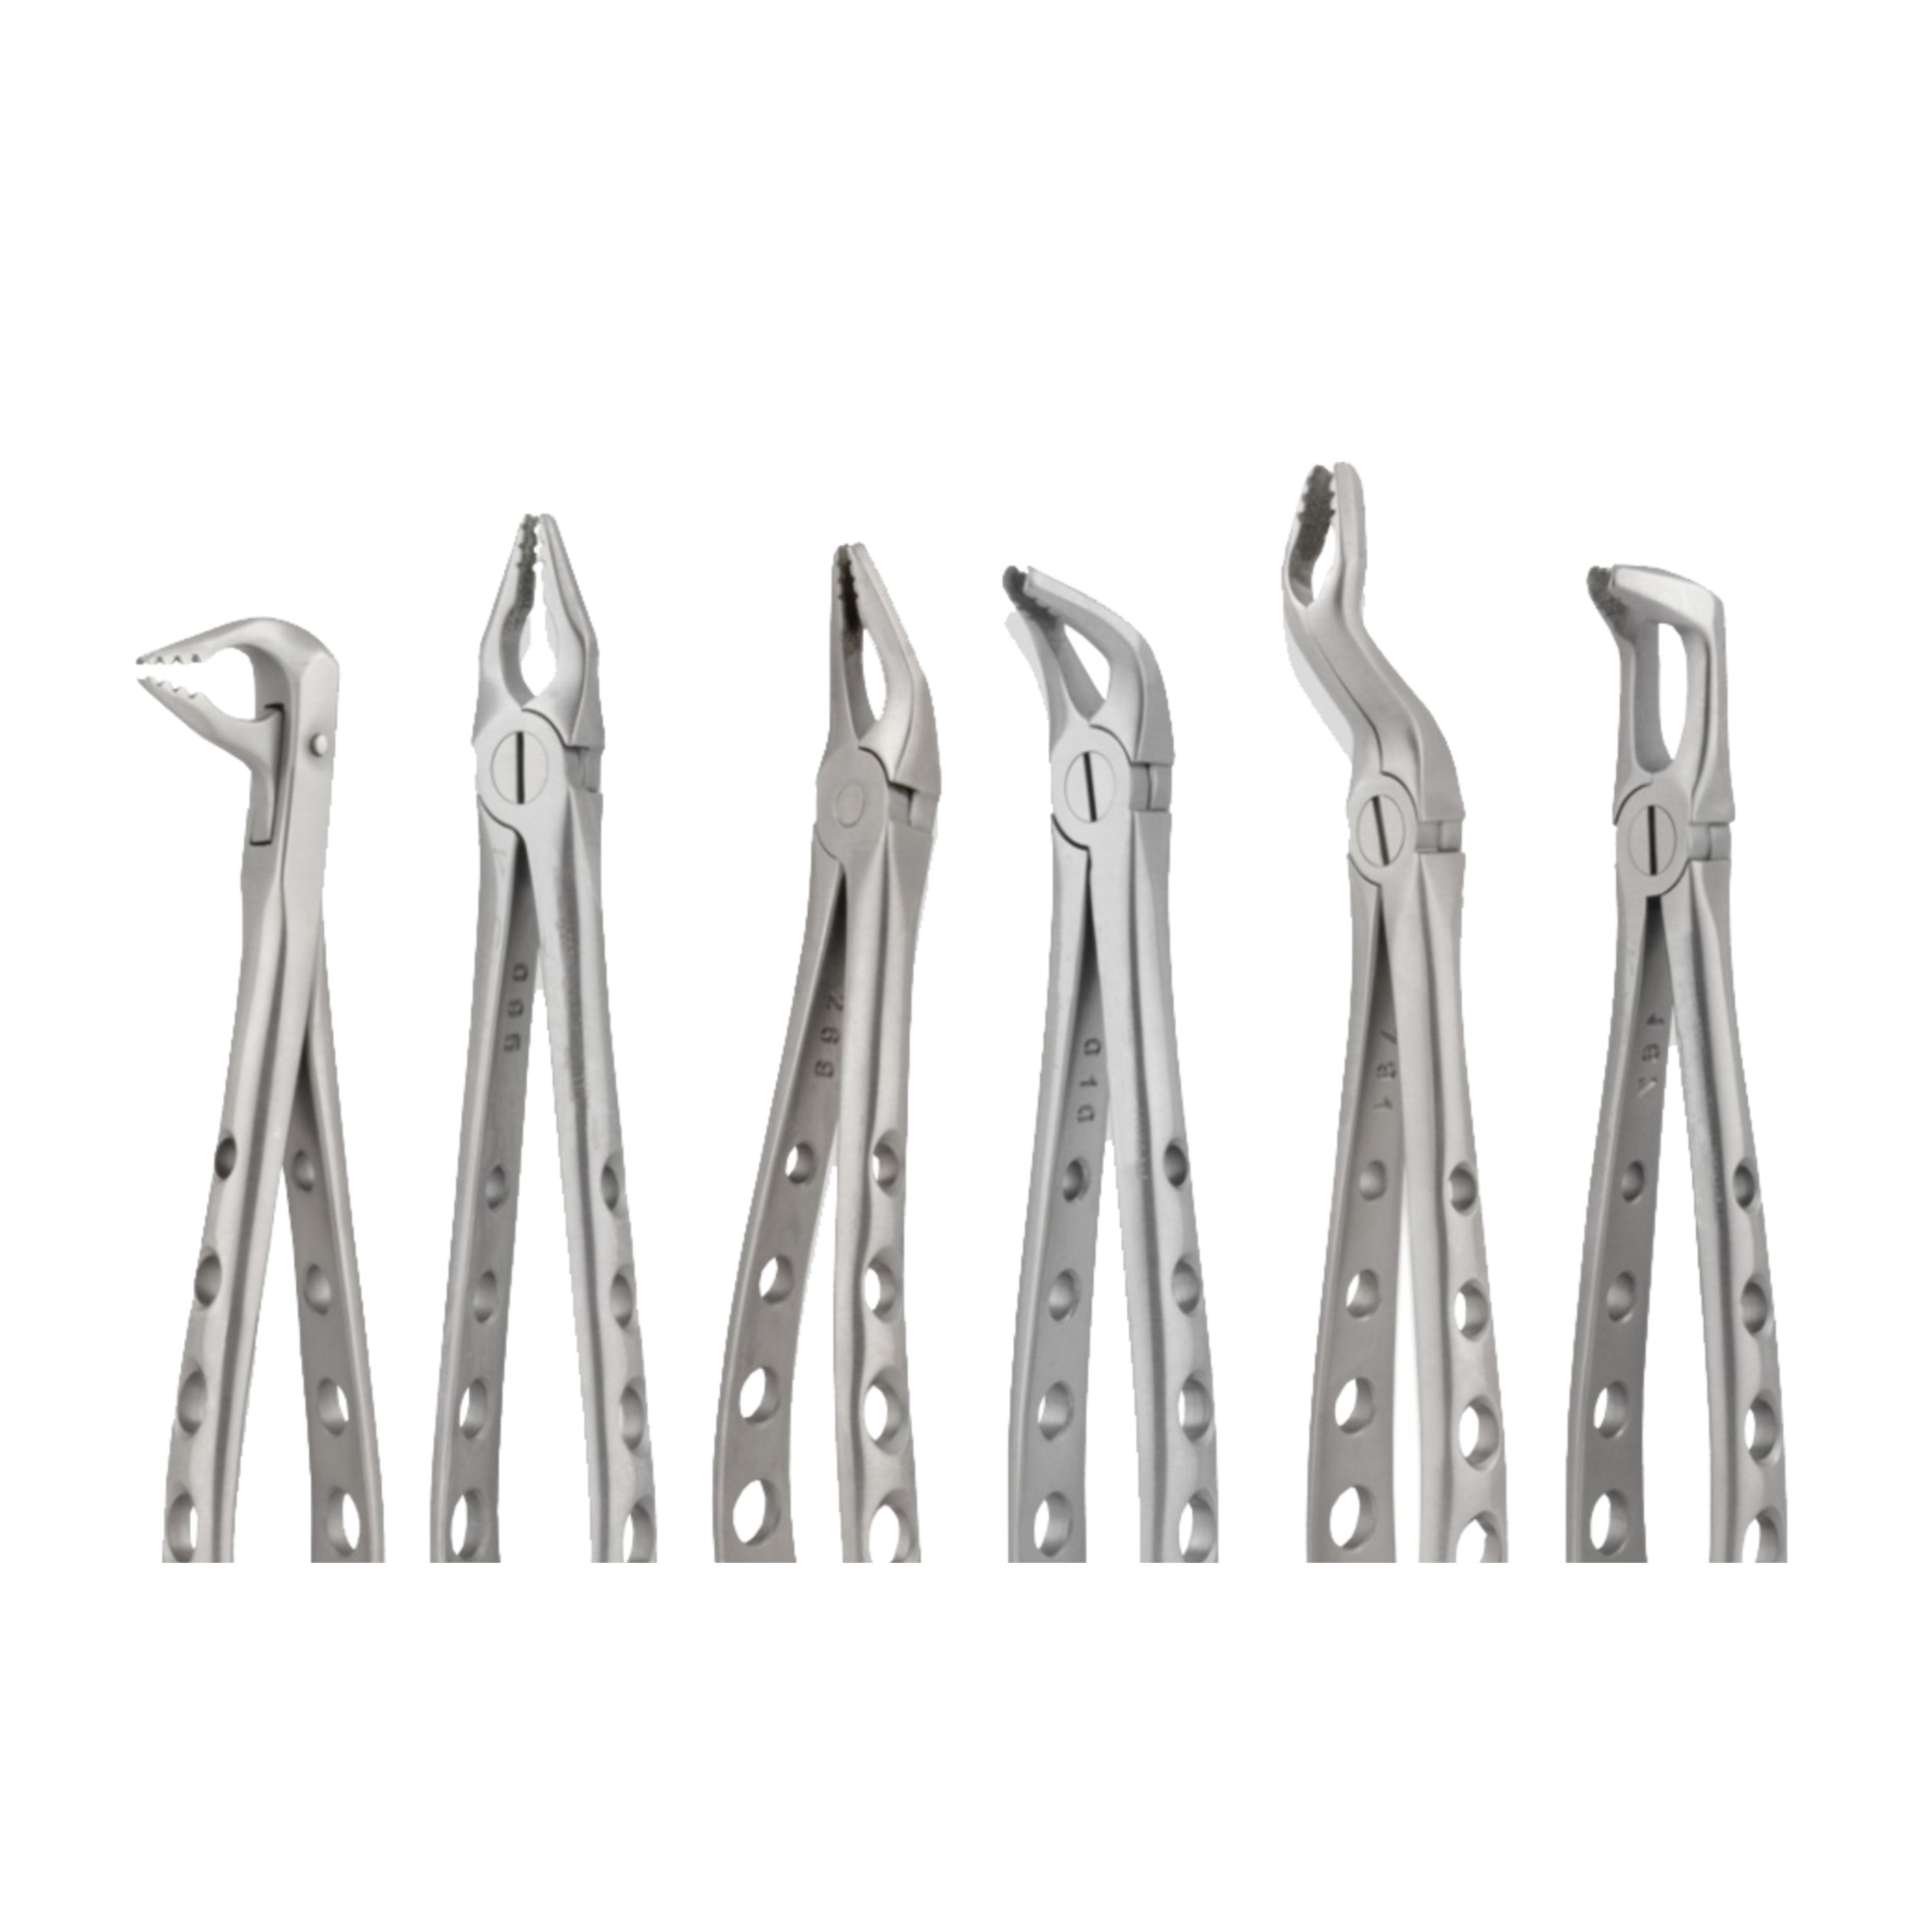 Trust & Care Deep Grip Extraction Forceps Set Of 6-Pcs